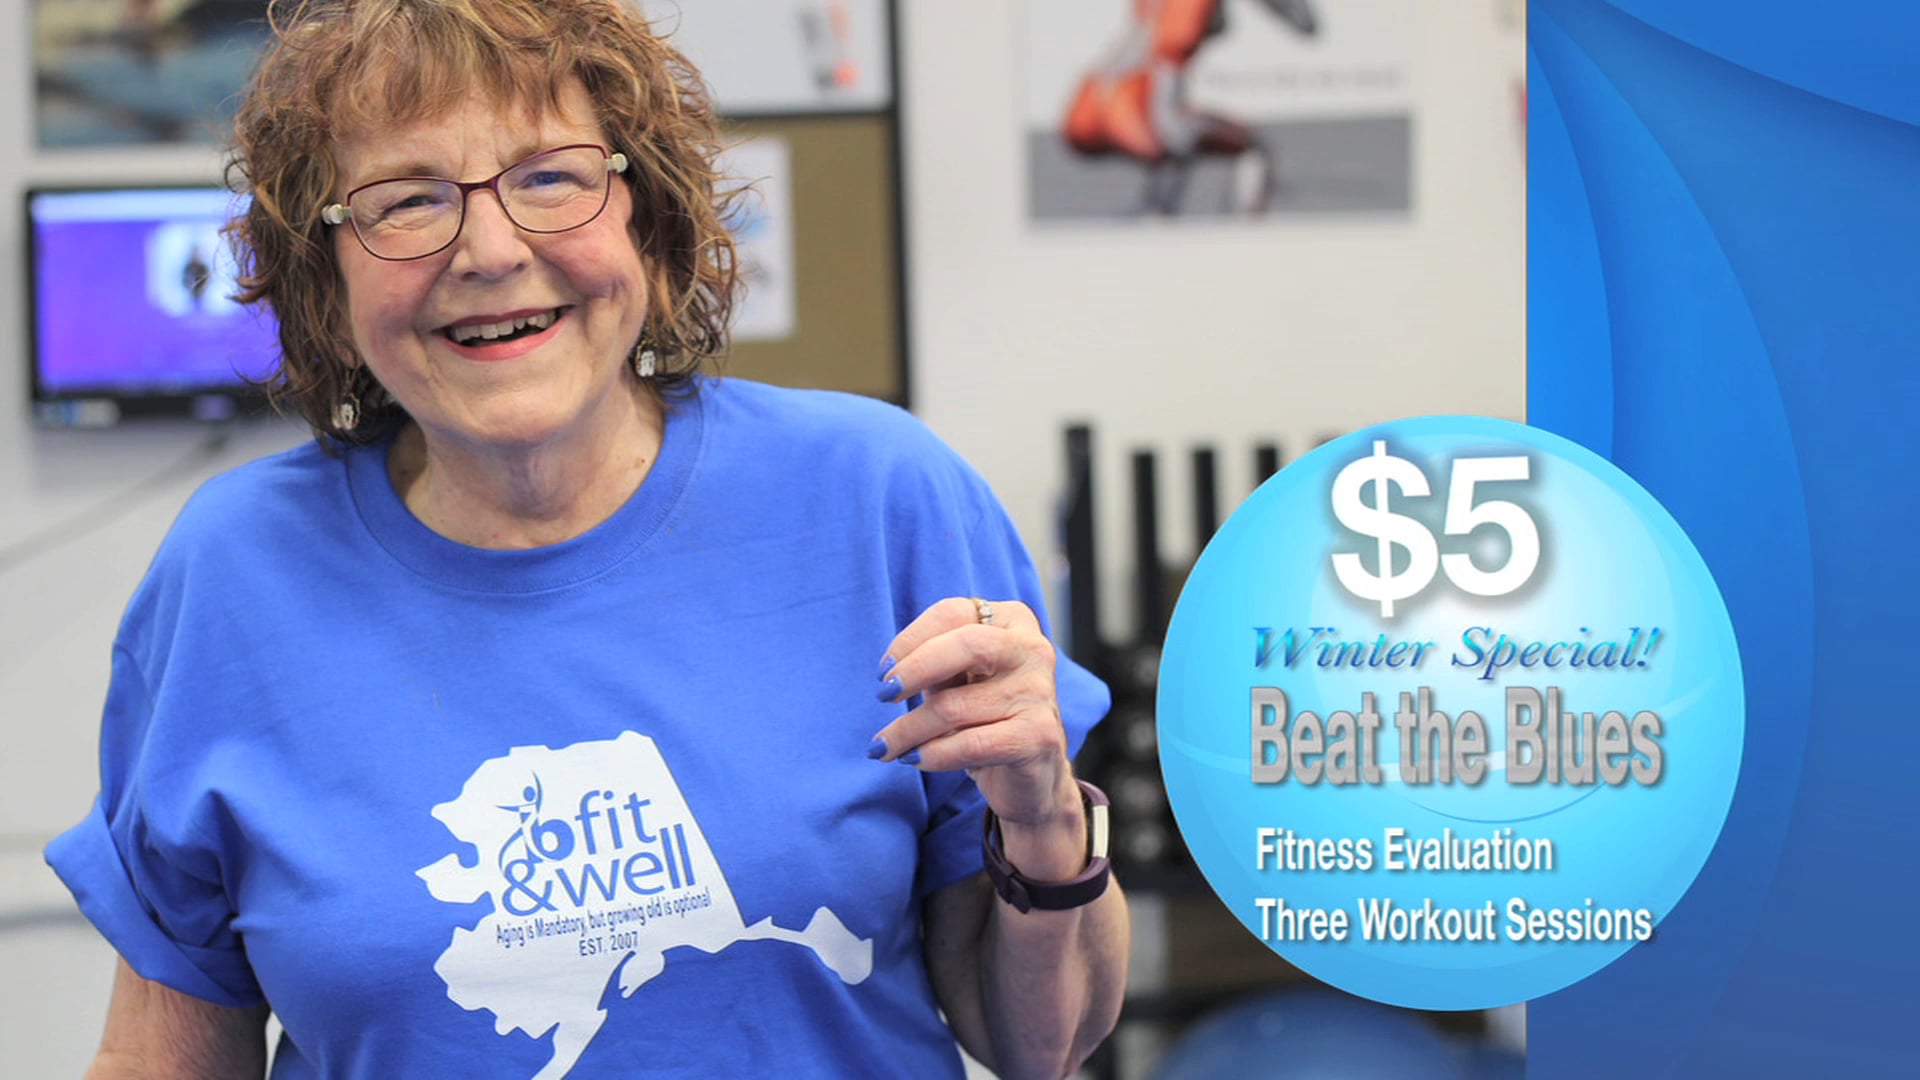 Beat the Blues at BFit & Well!  $5 Special